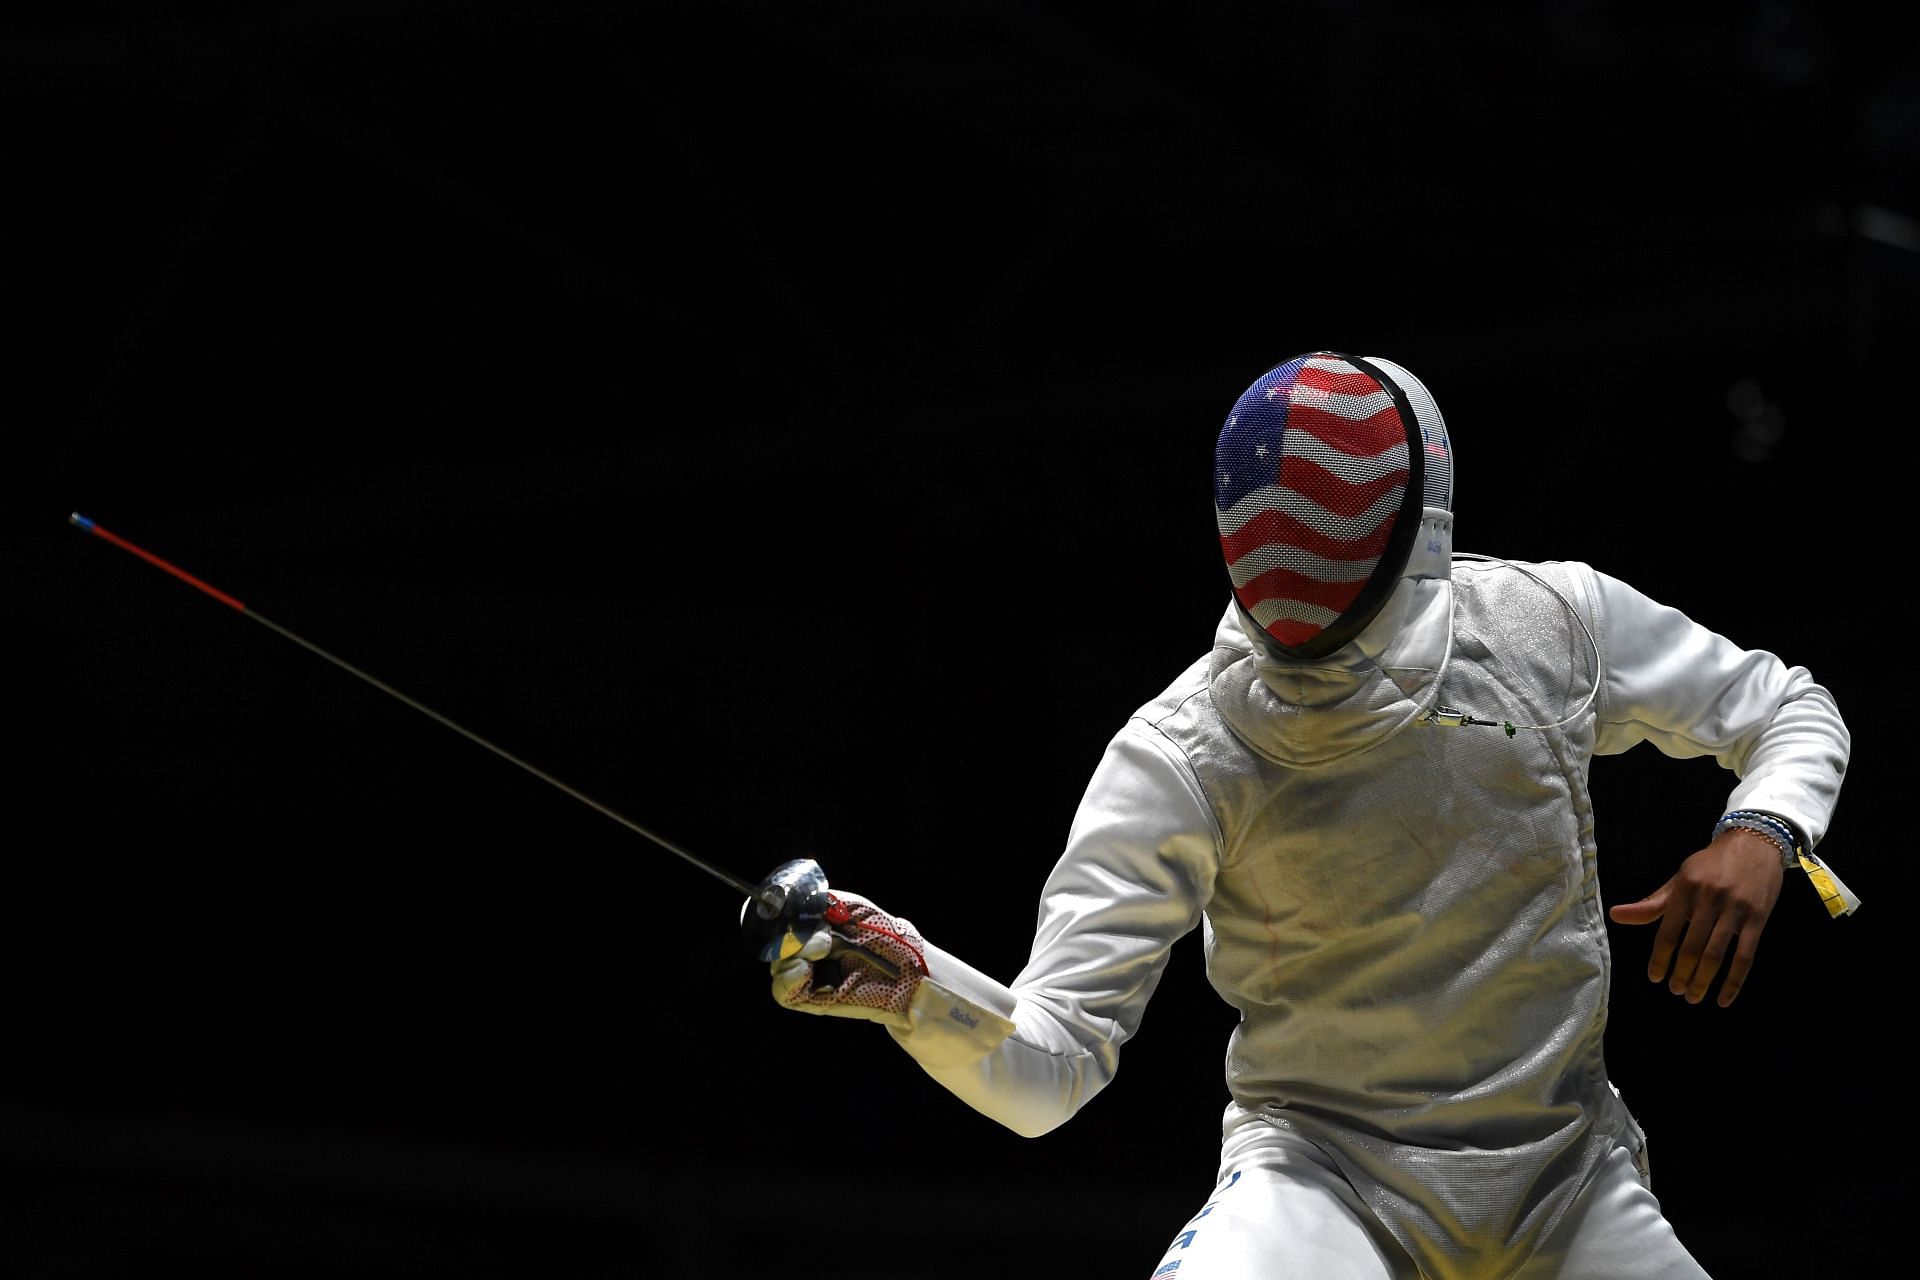 Miles Chamley-Watson of the United States competes during a Men&#039;s Foil Team Quarterfinal bout at the 2016 Olympic Games in Rio de Janeiro, Brazil.